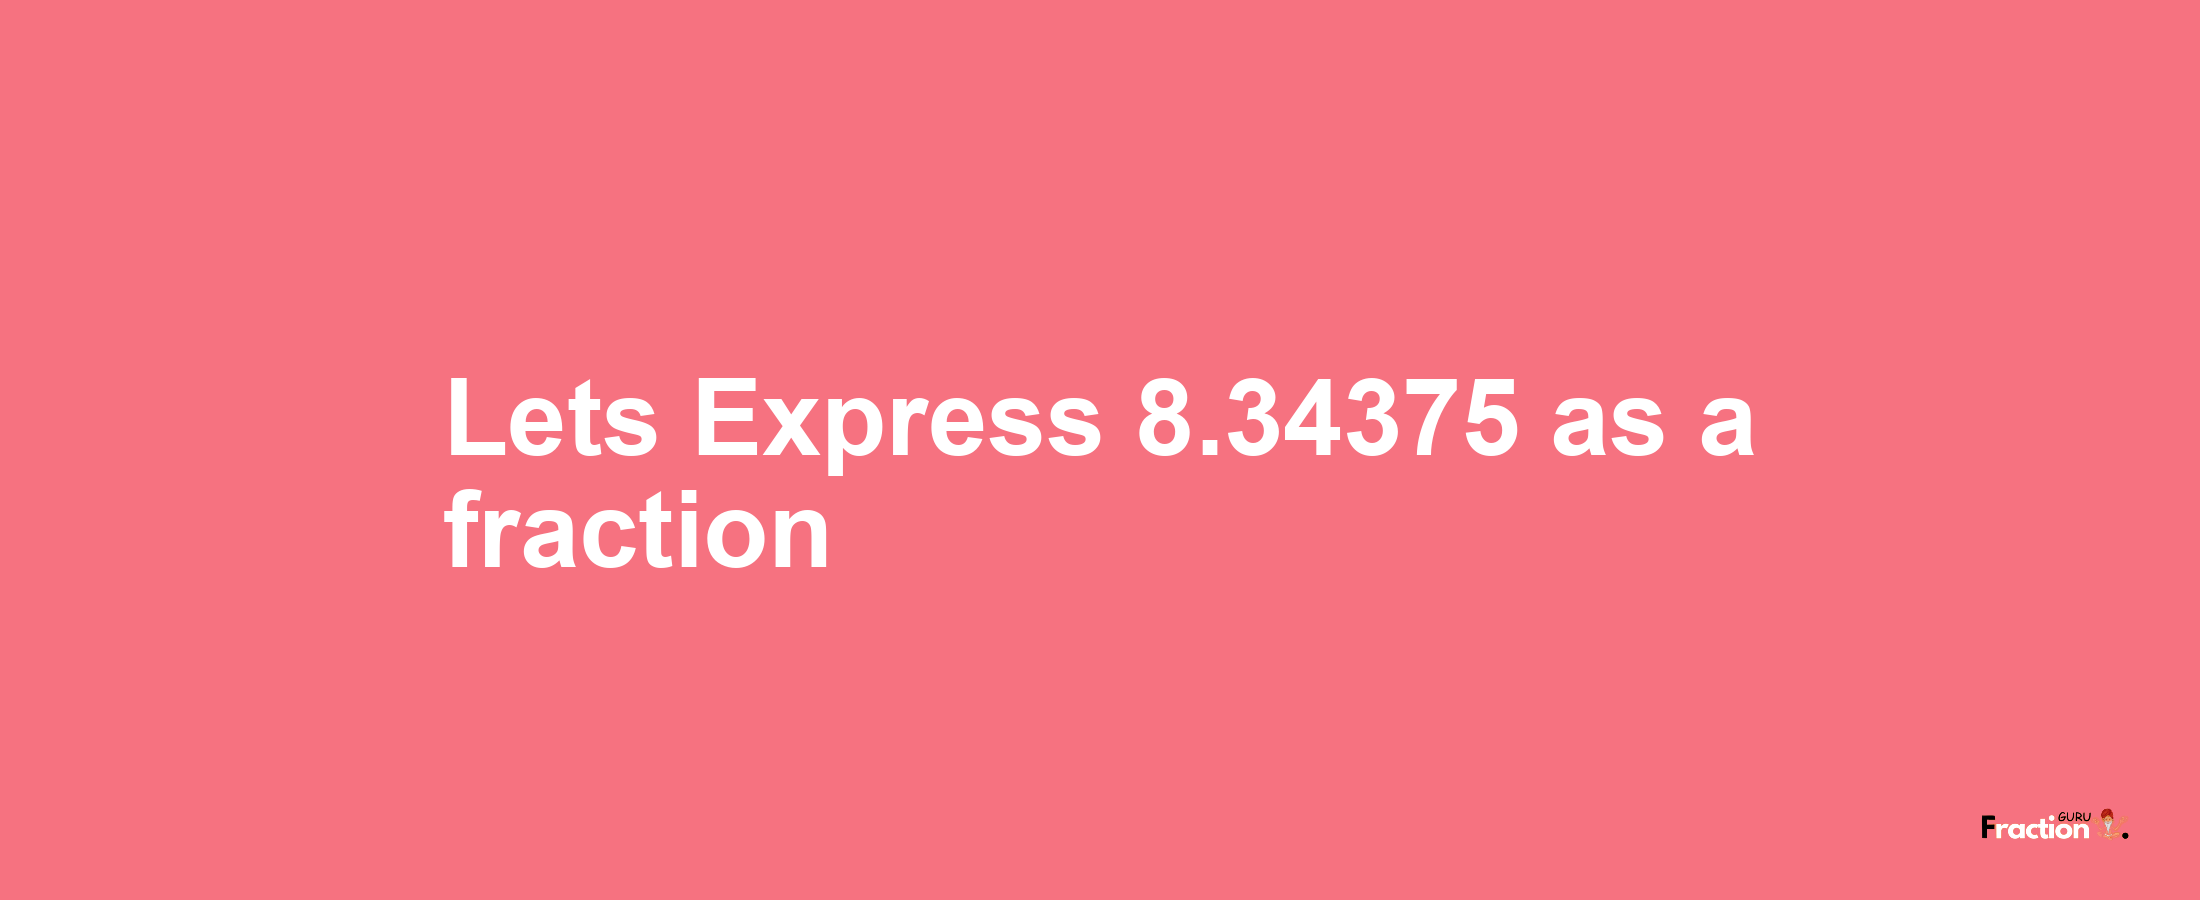 Lets Express 8.34375 as afraction